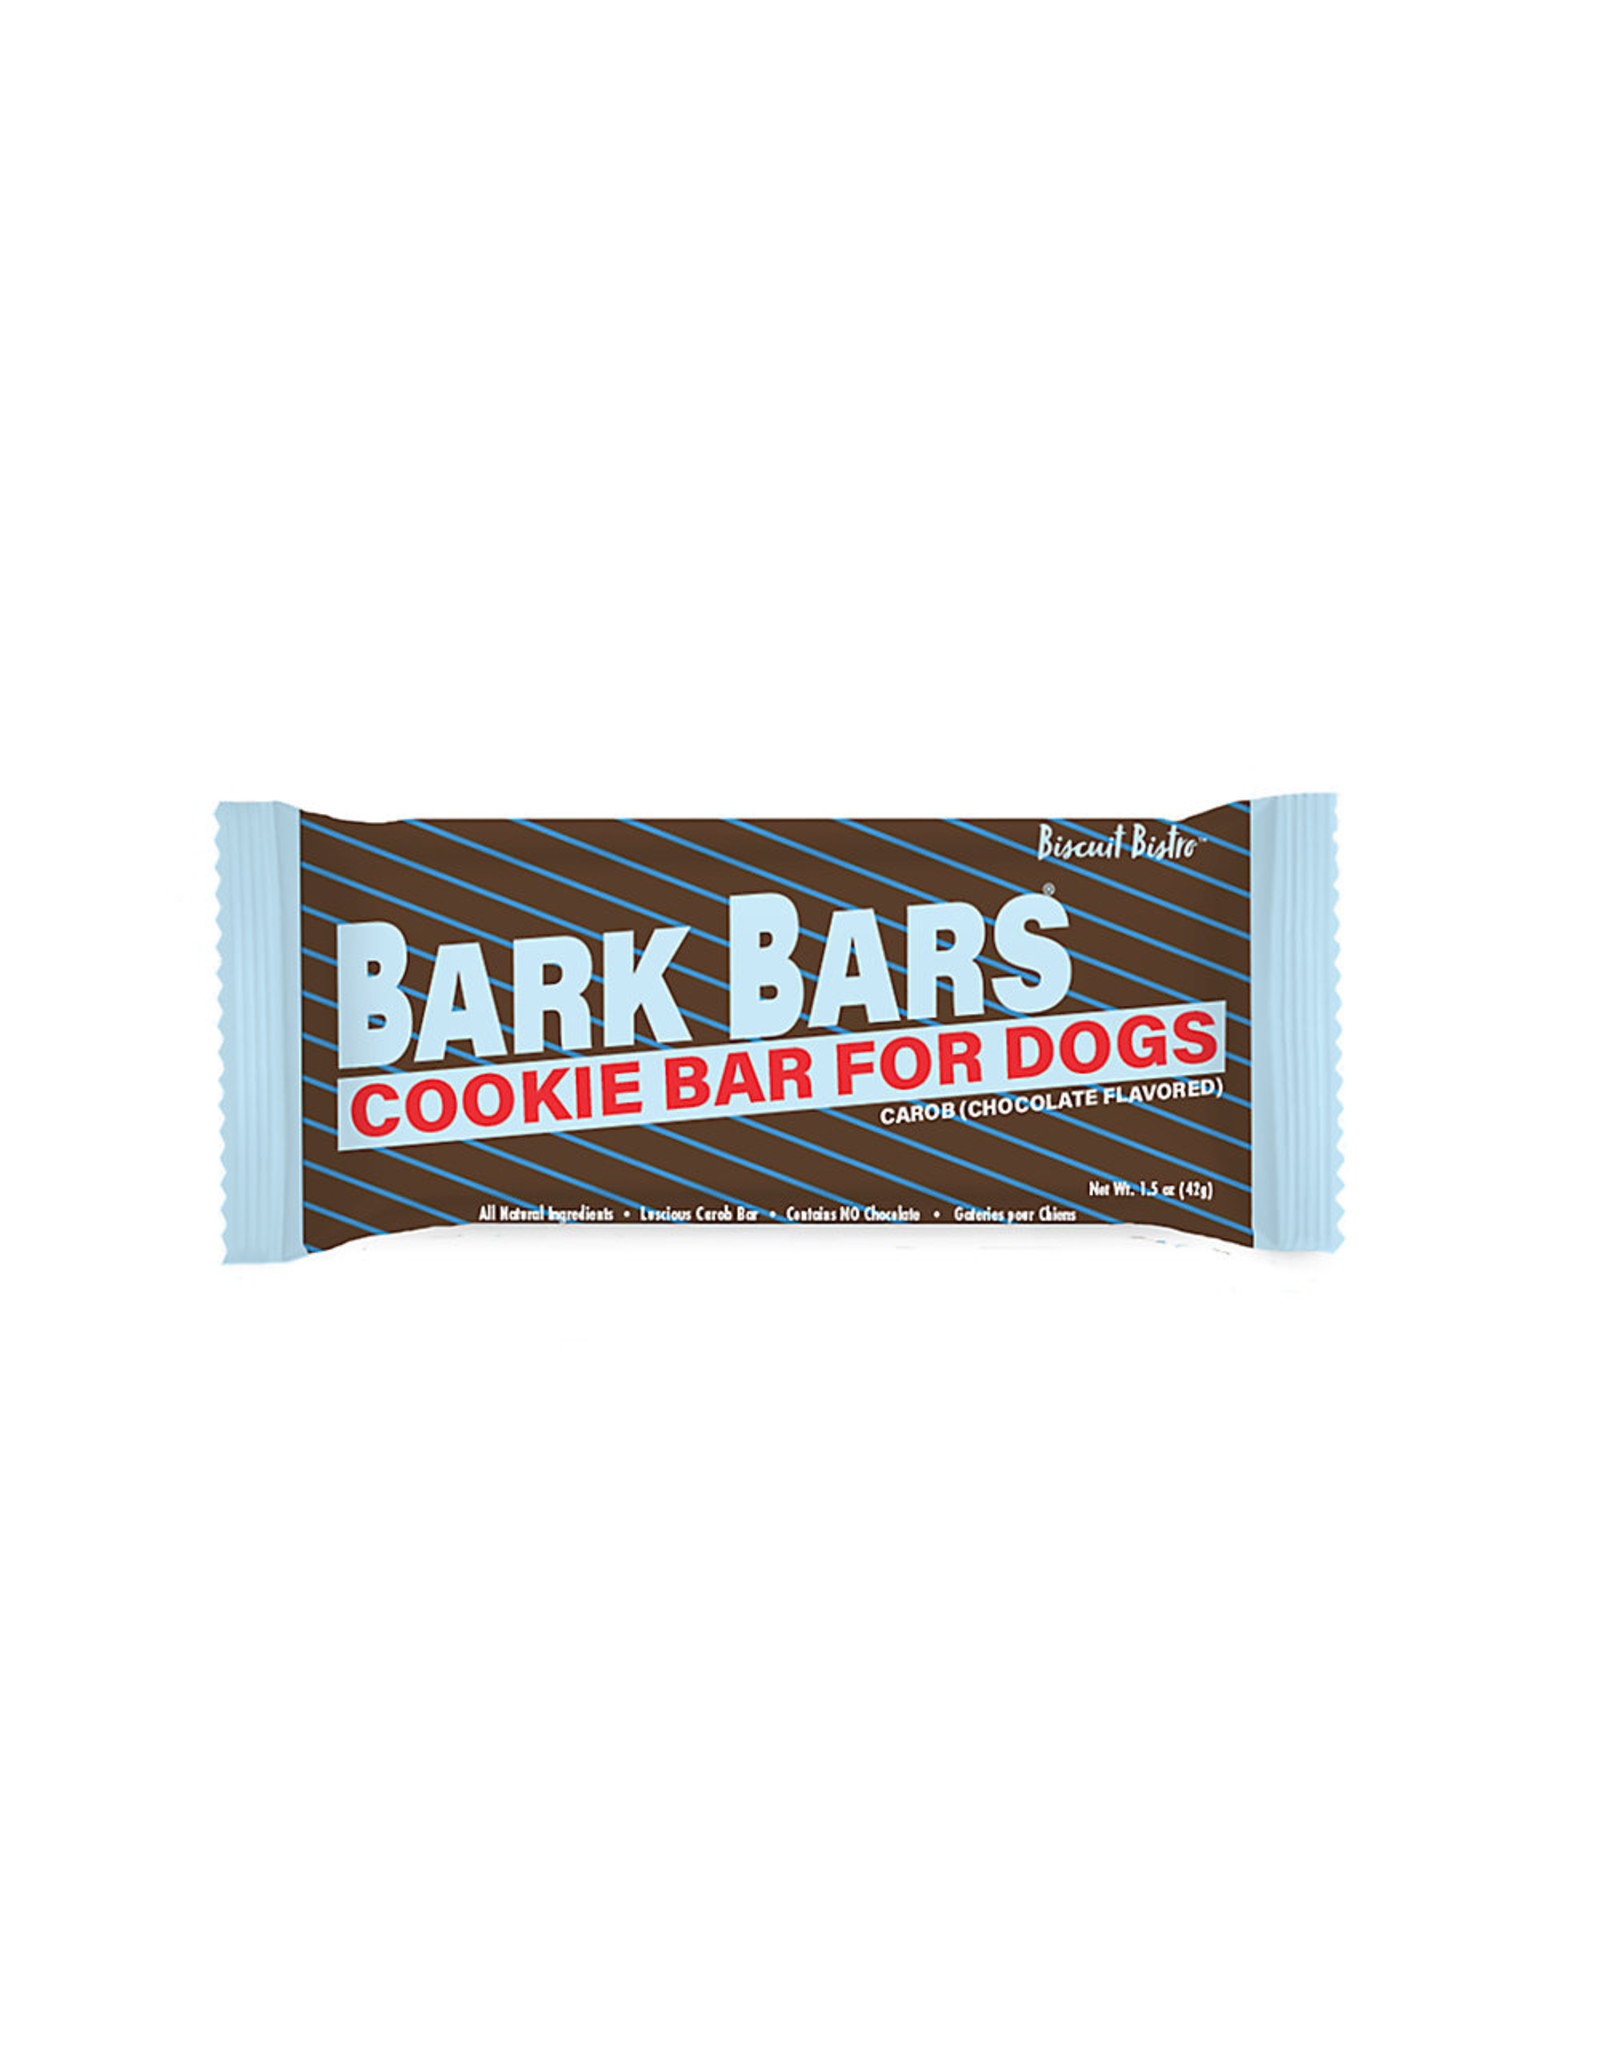 PetKnowledgy Petknowledgy Bark Bars Cookie Bar for Dogs Individual and 4 Pack